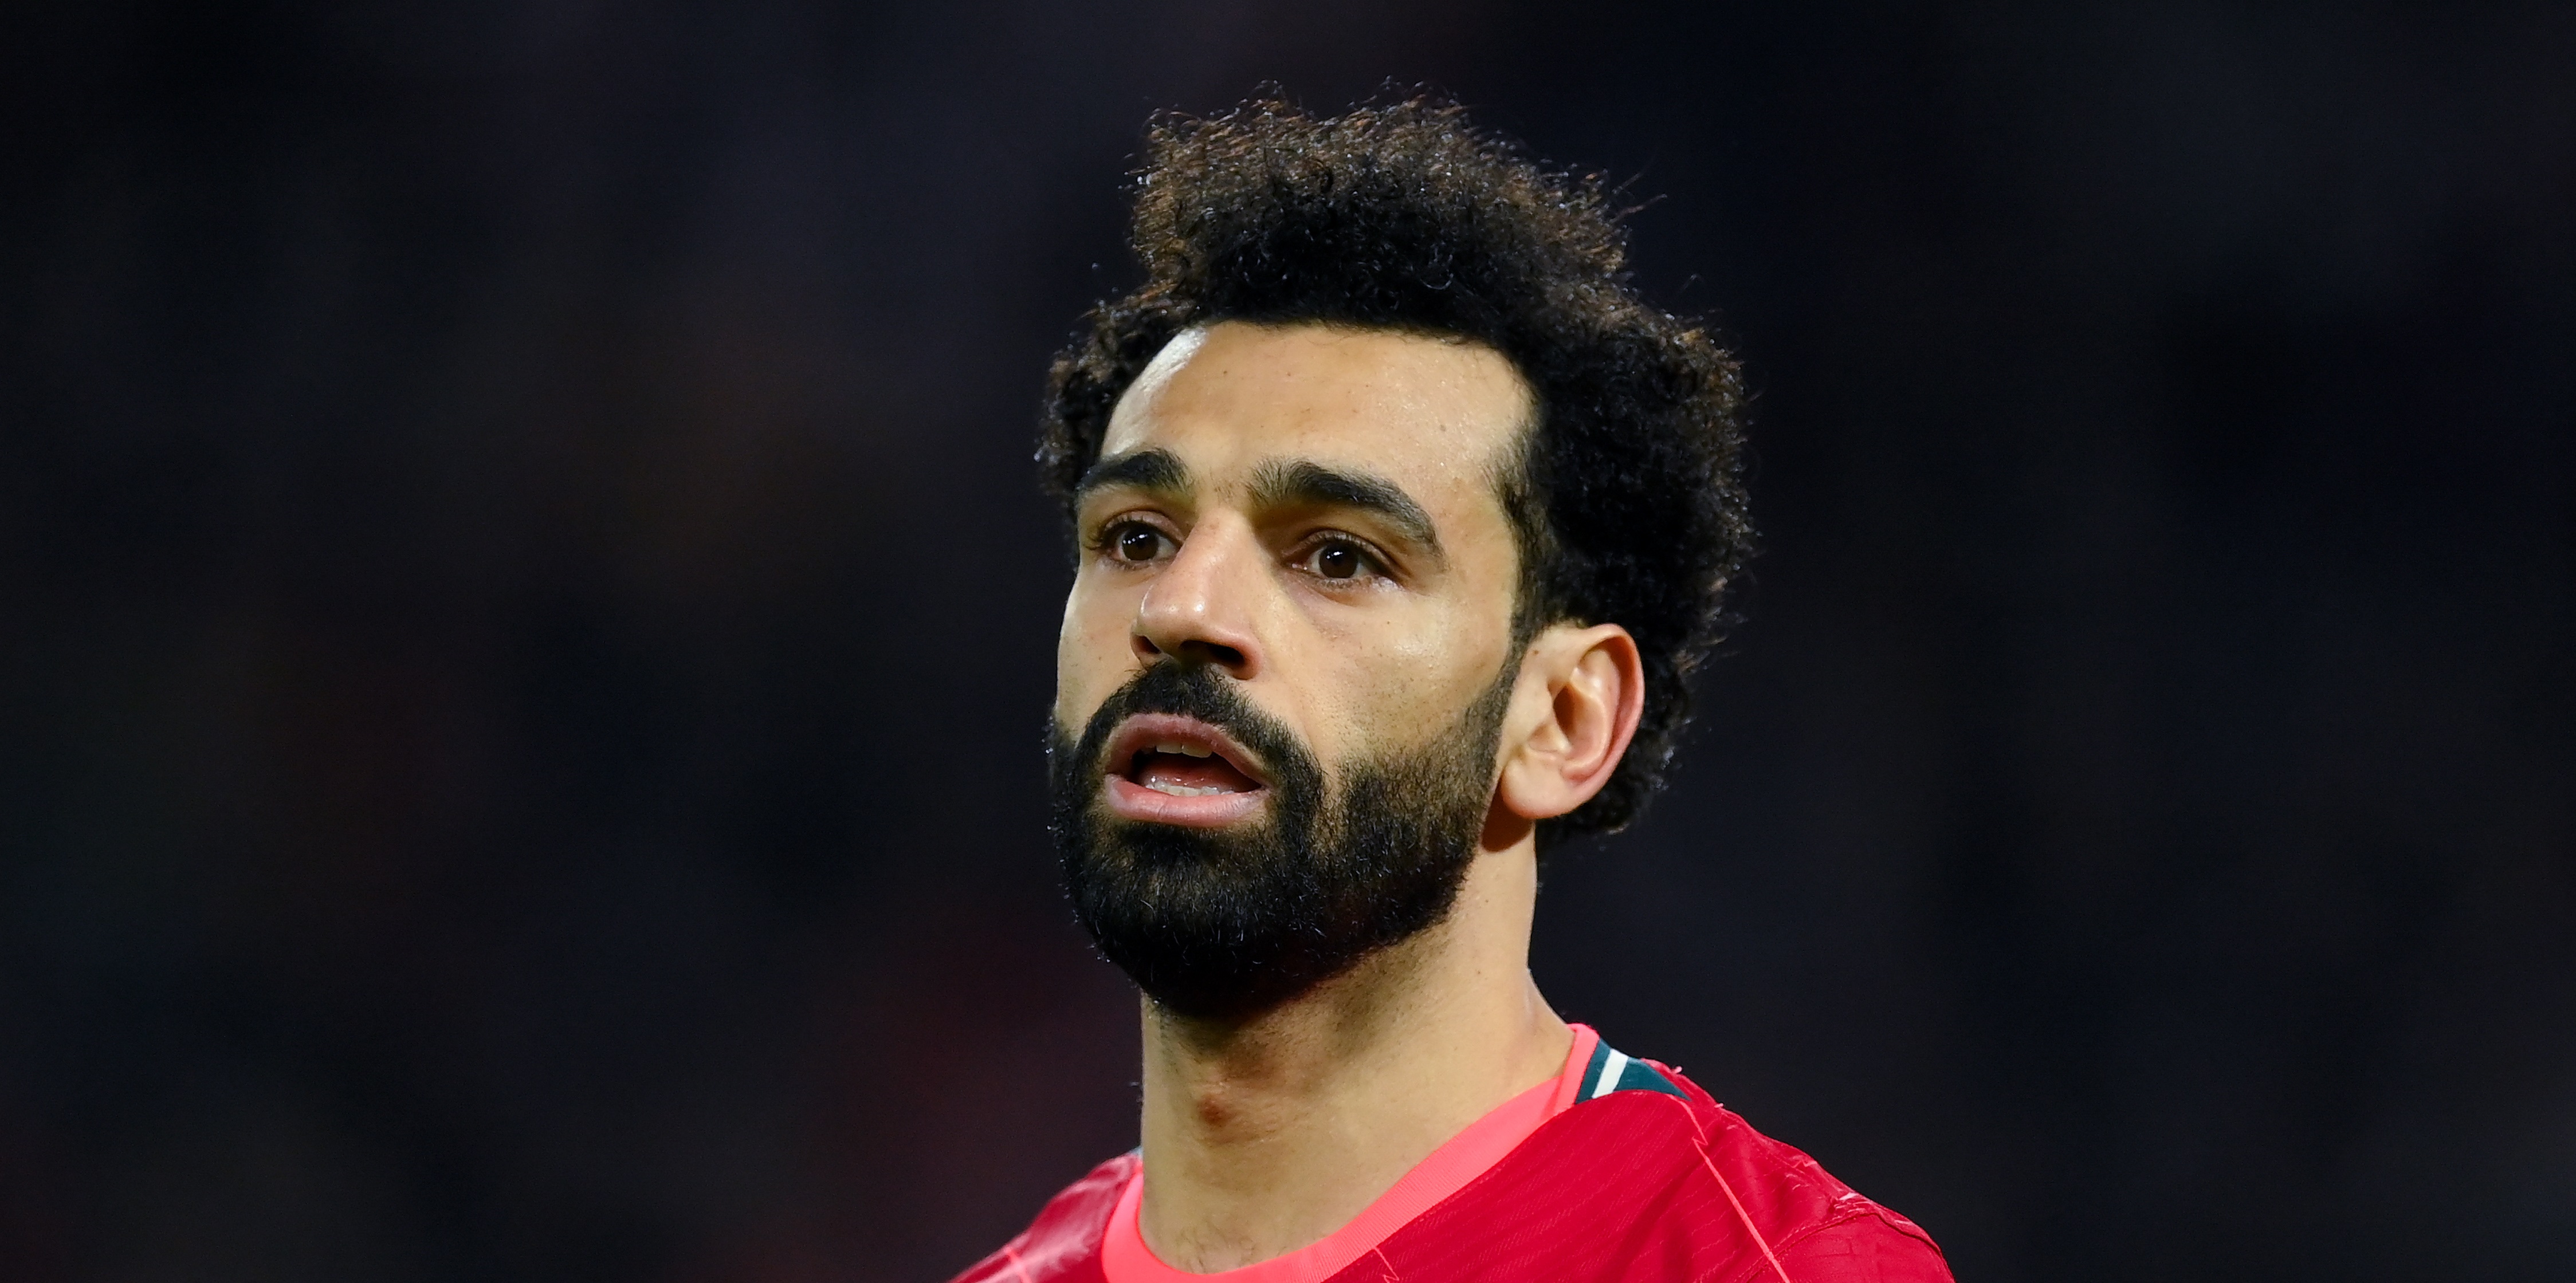 Ex-Egypt coach questions Mo Salah’s effort in bizarre criticism of the Liverpool star